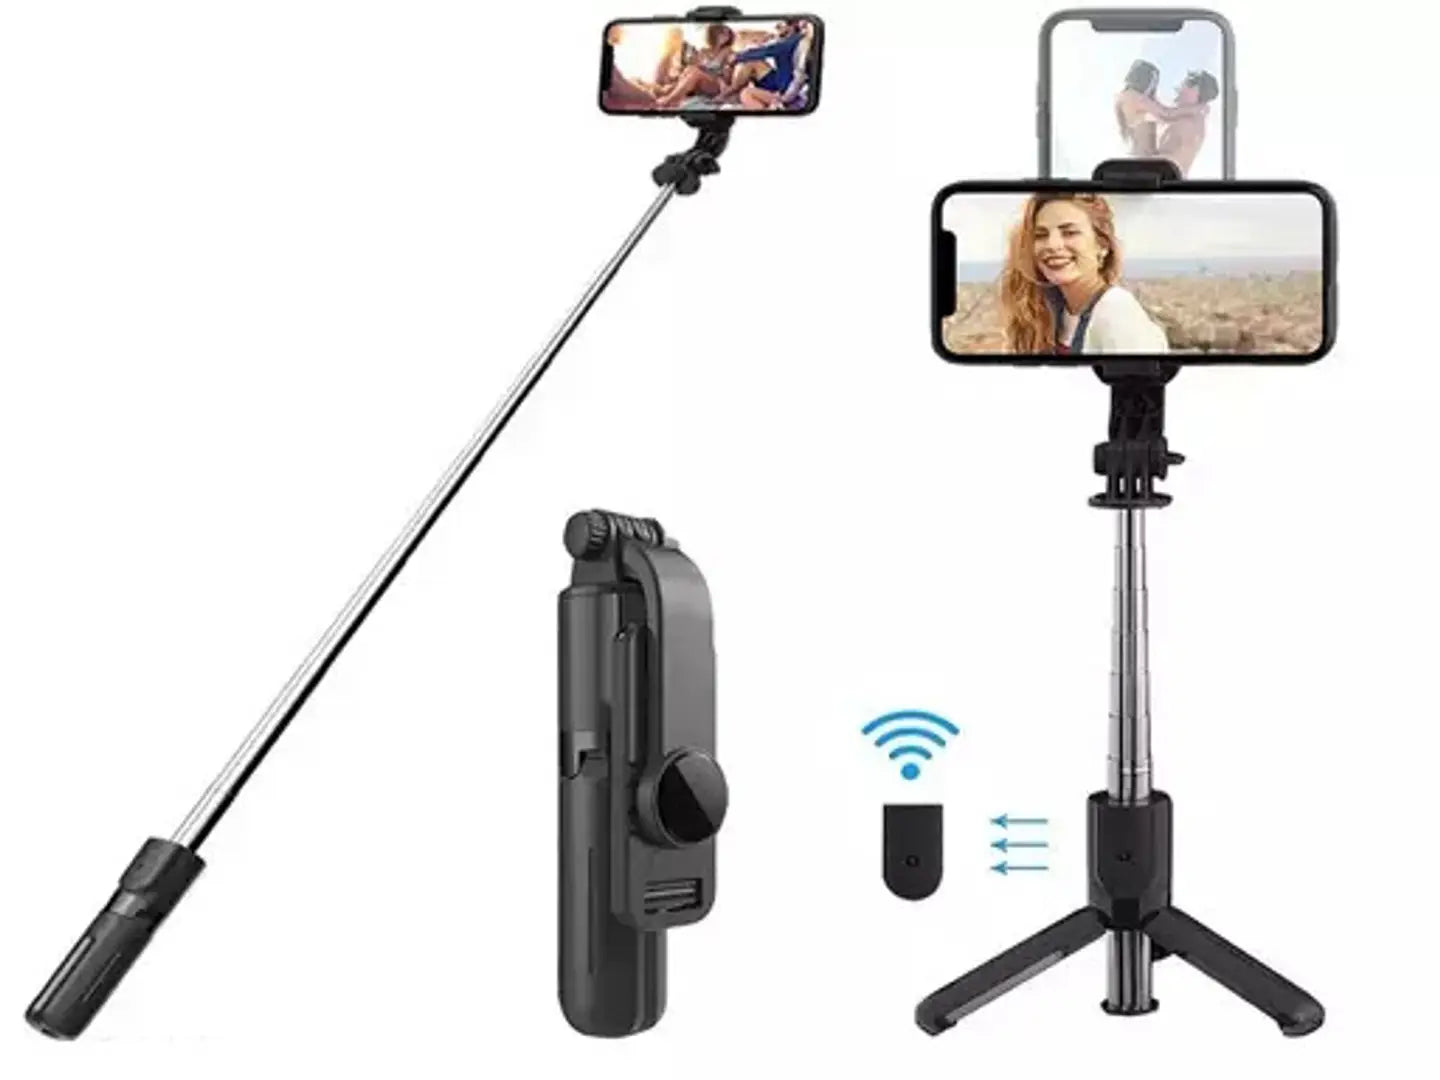 KUBA Bluetooth Extendable Selfie Stick with Tripod Stand and Wireless Remote,3-in-1 Multifunctional Selfie Stick Tripod